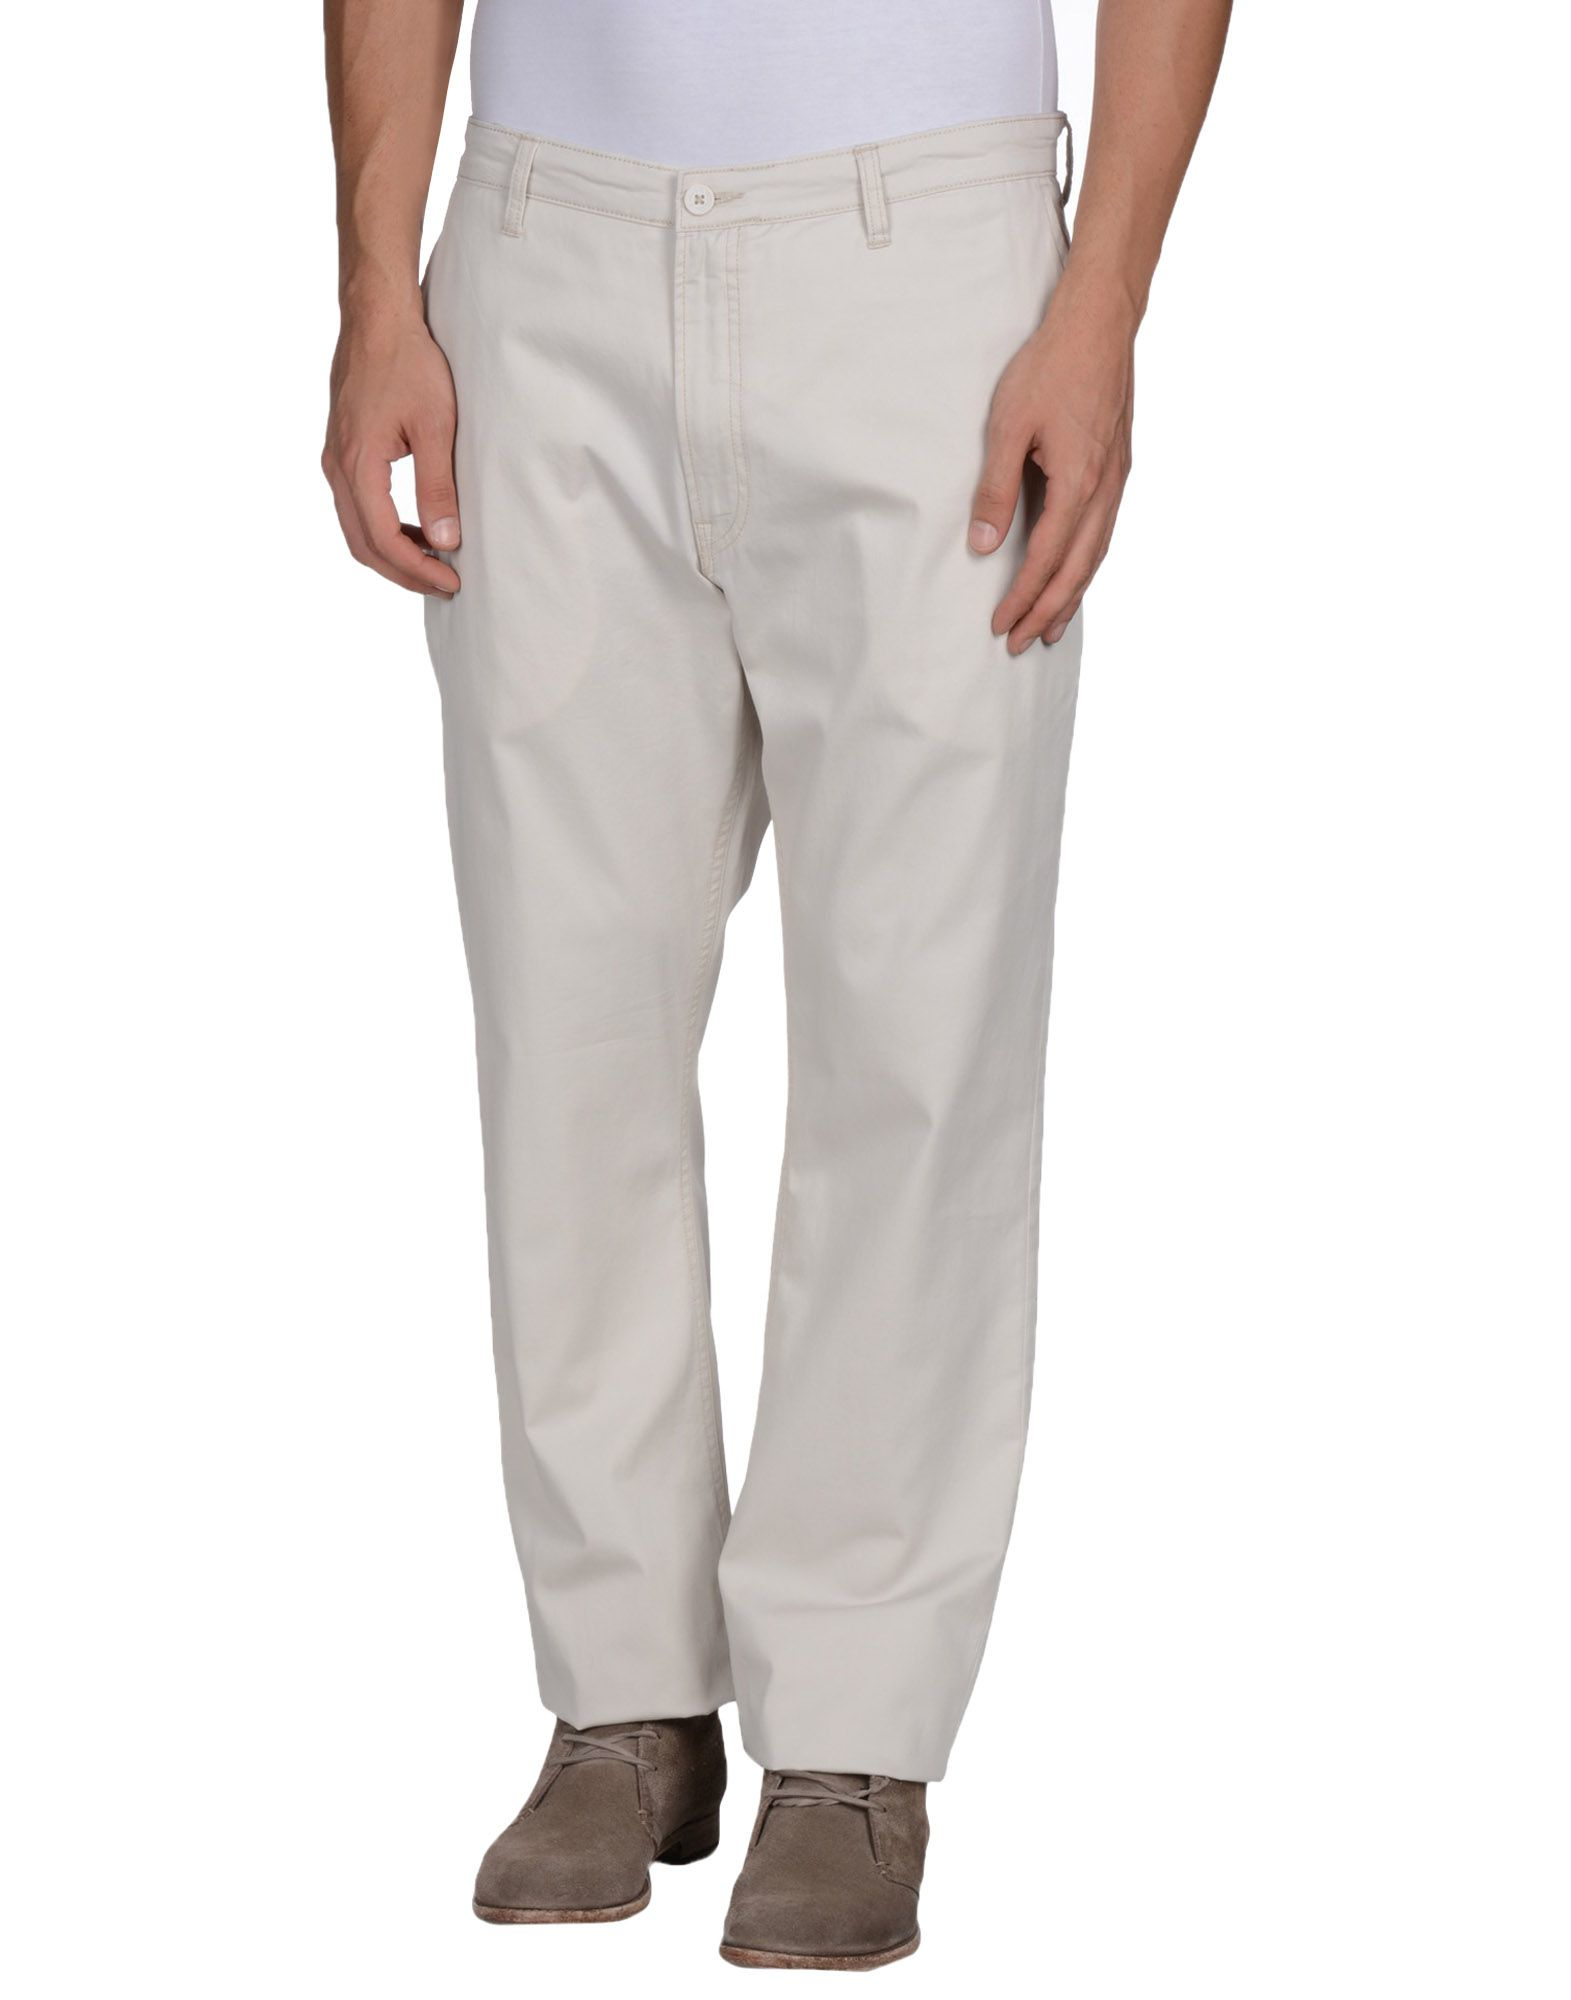 Lyst - Lee jeans Casual Trouser in White for Men